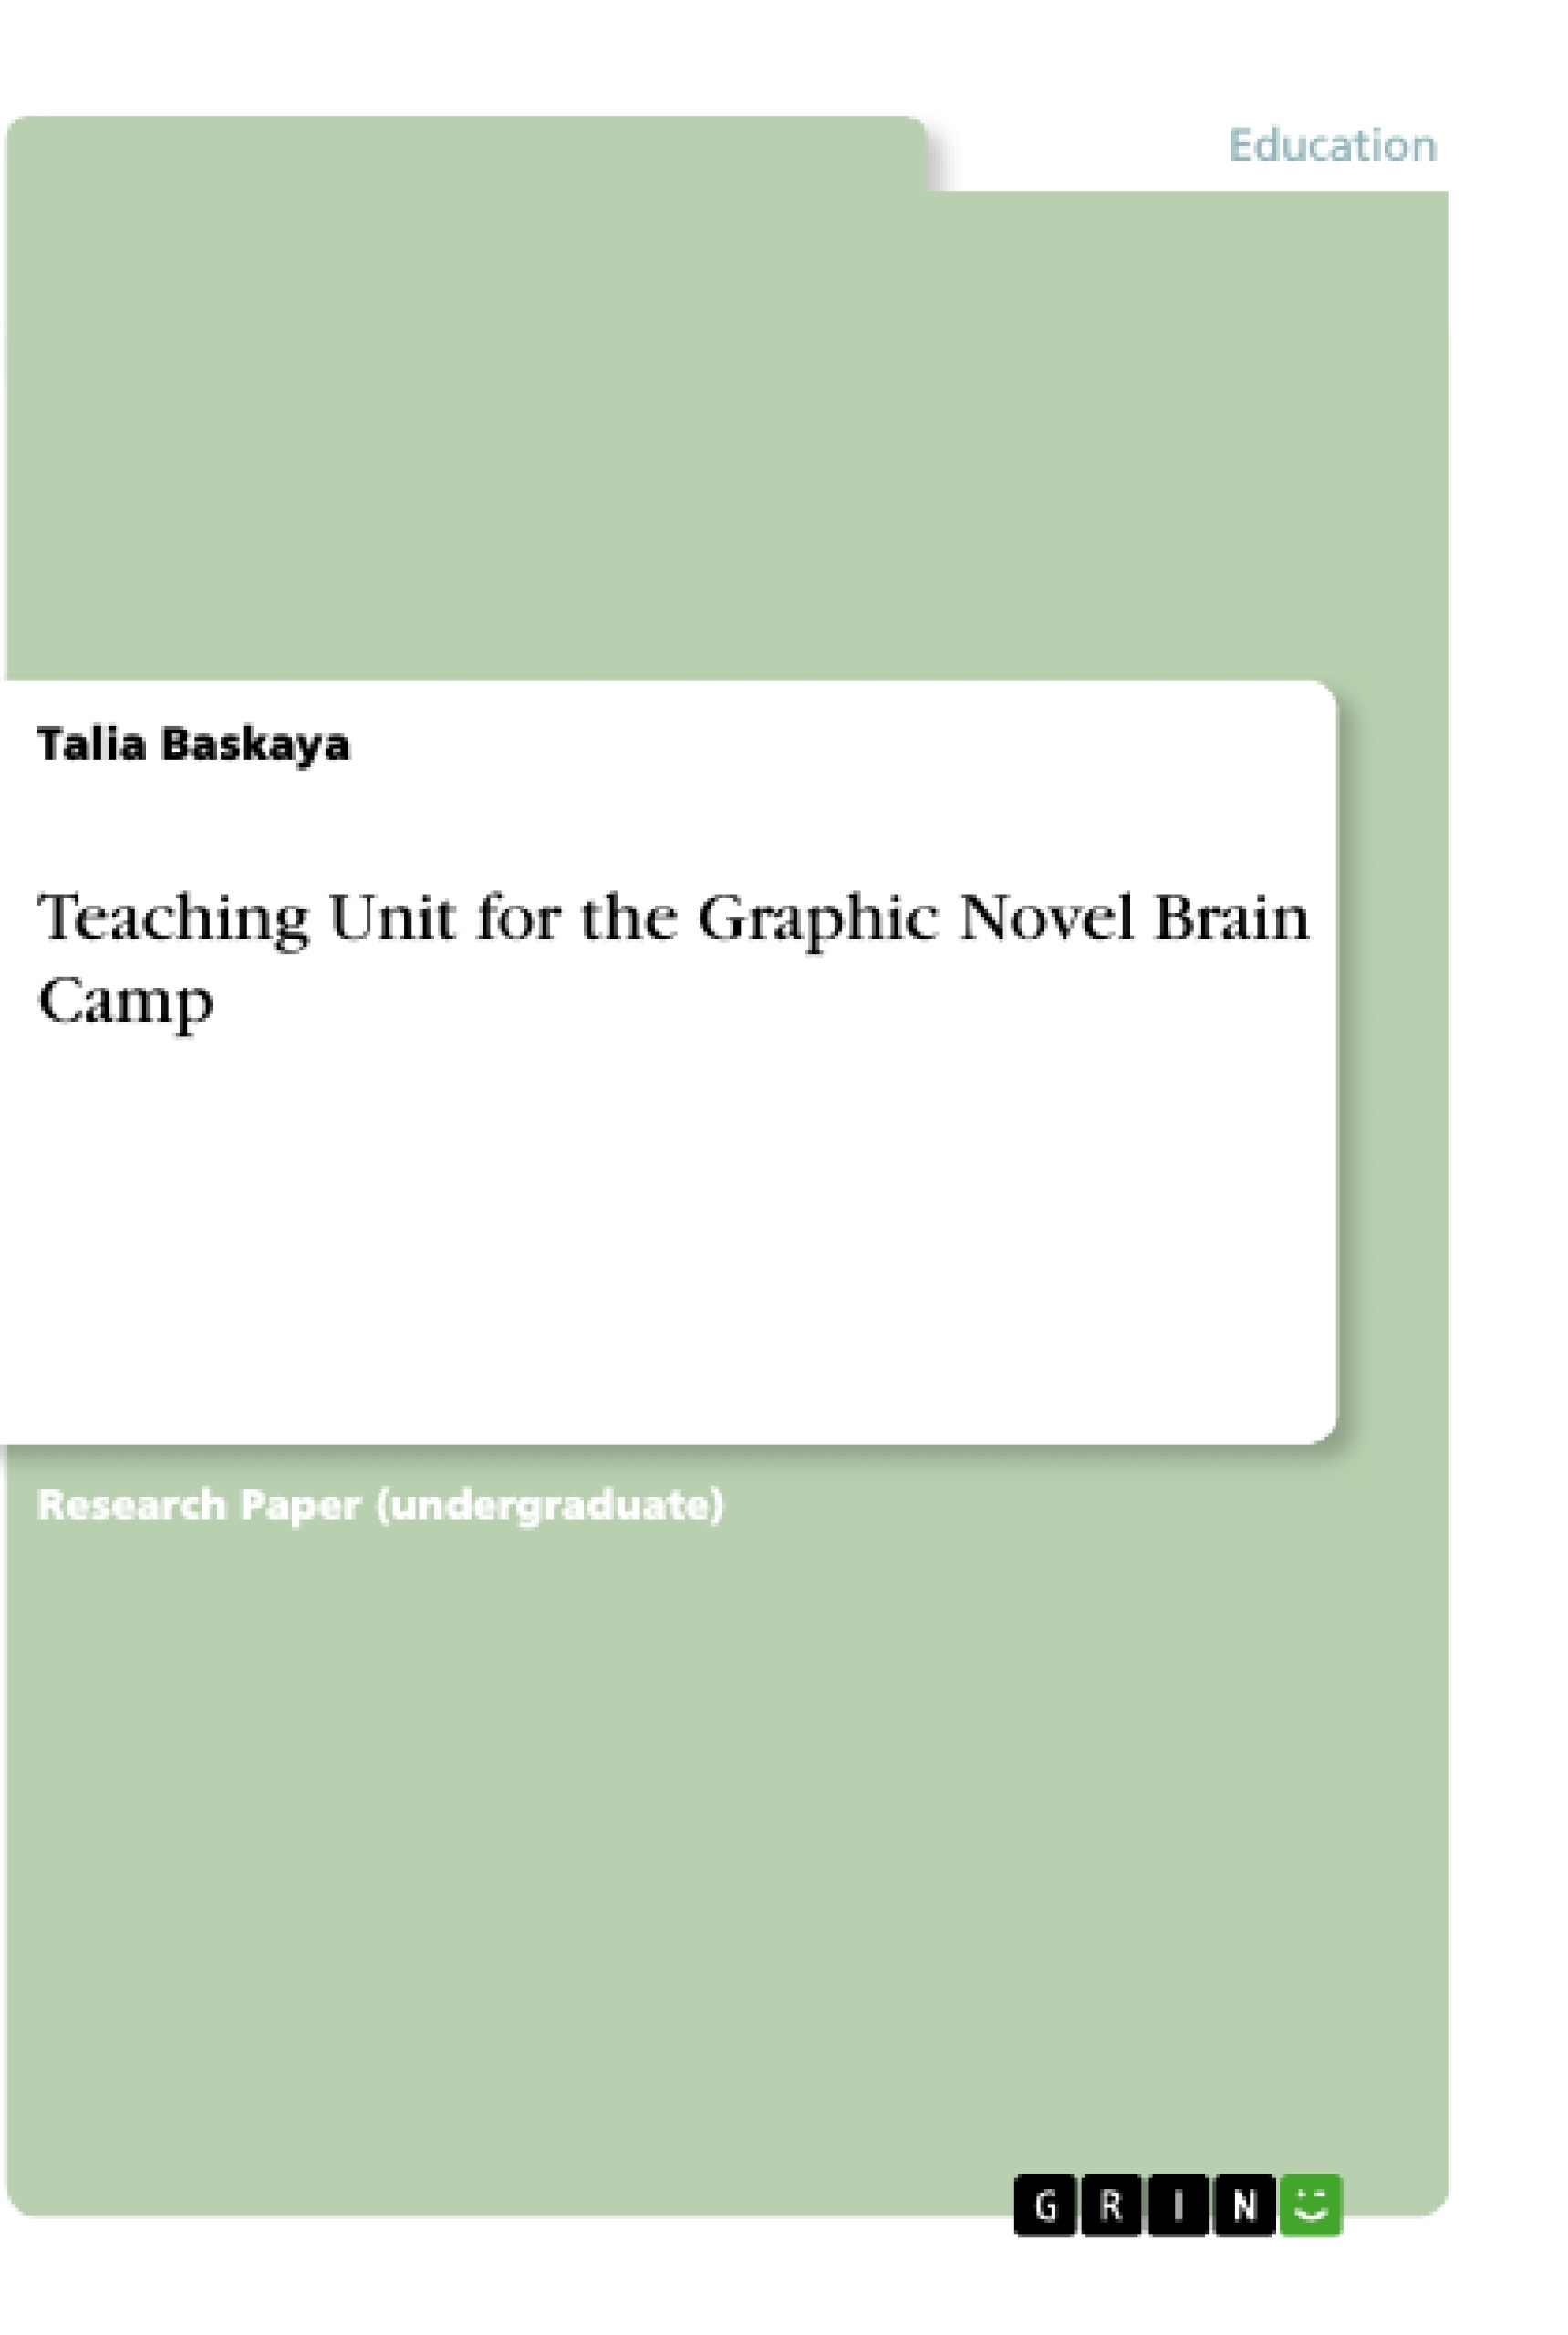 Título: Teaching Unit for the Graphic Novel Brain Camp